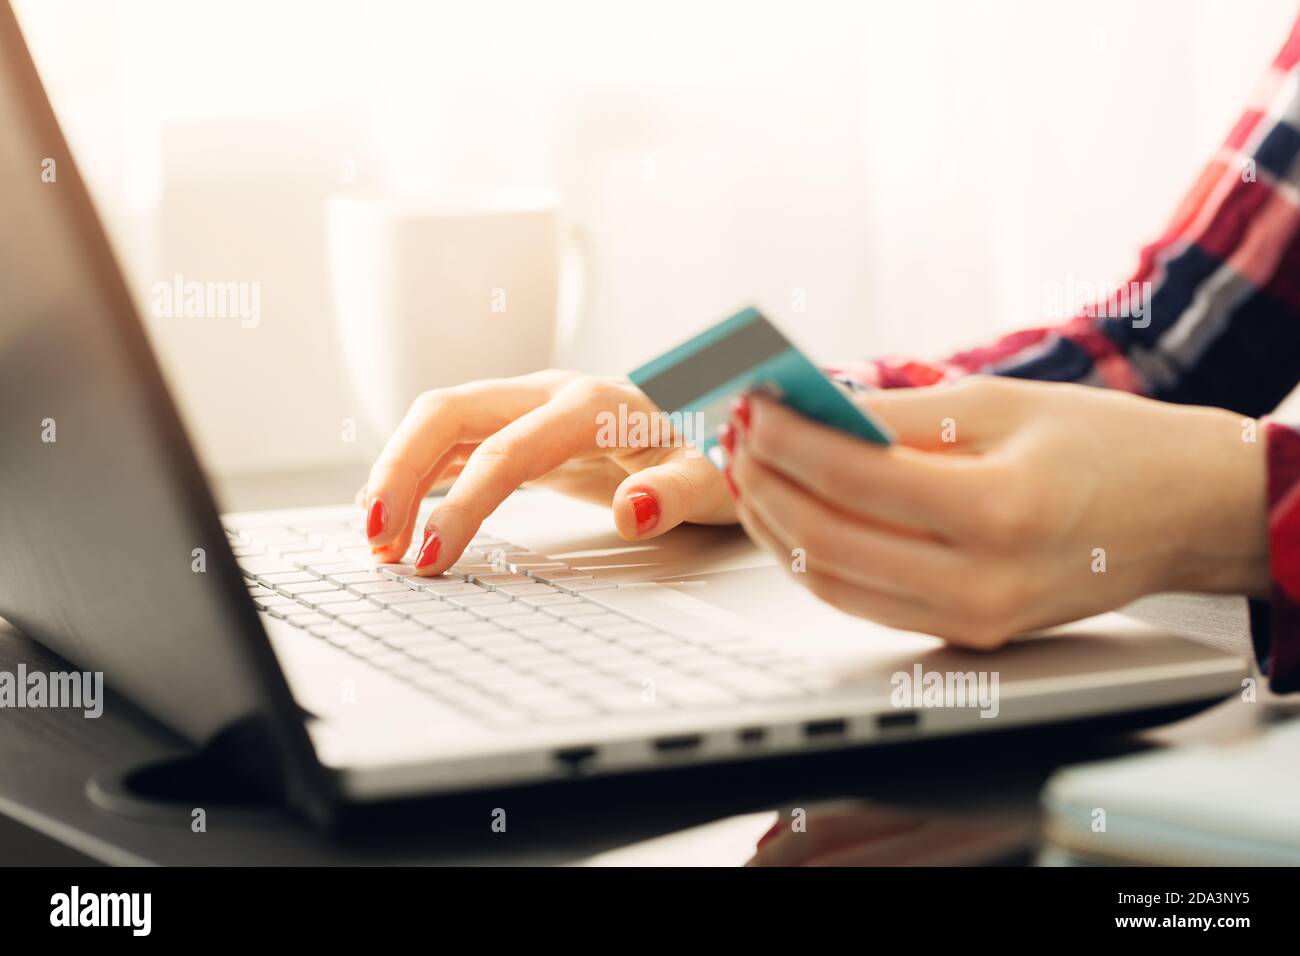 Business online shopping with credit card background Stock Photo